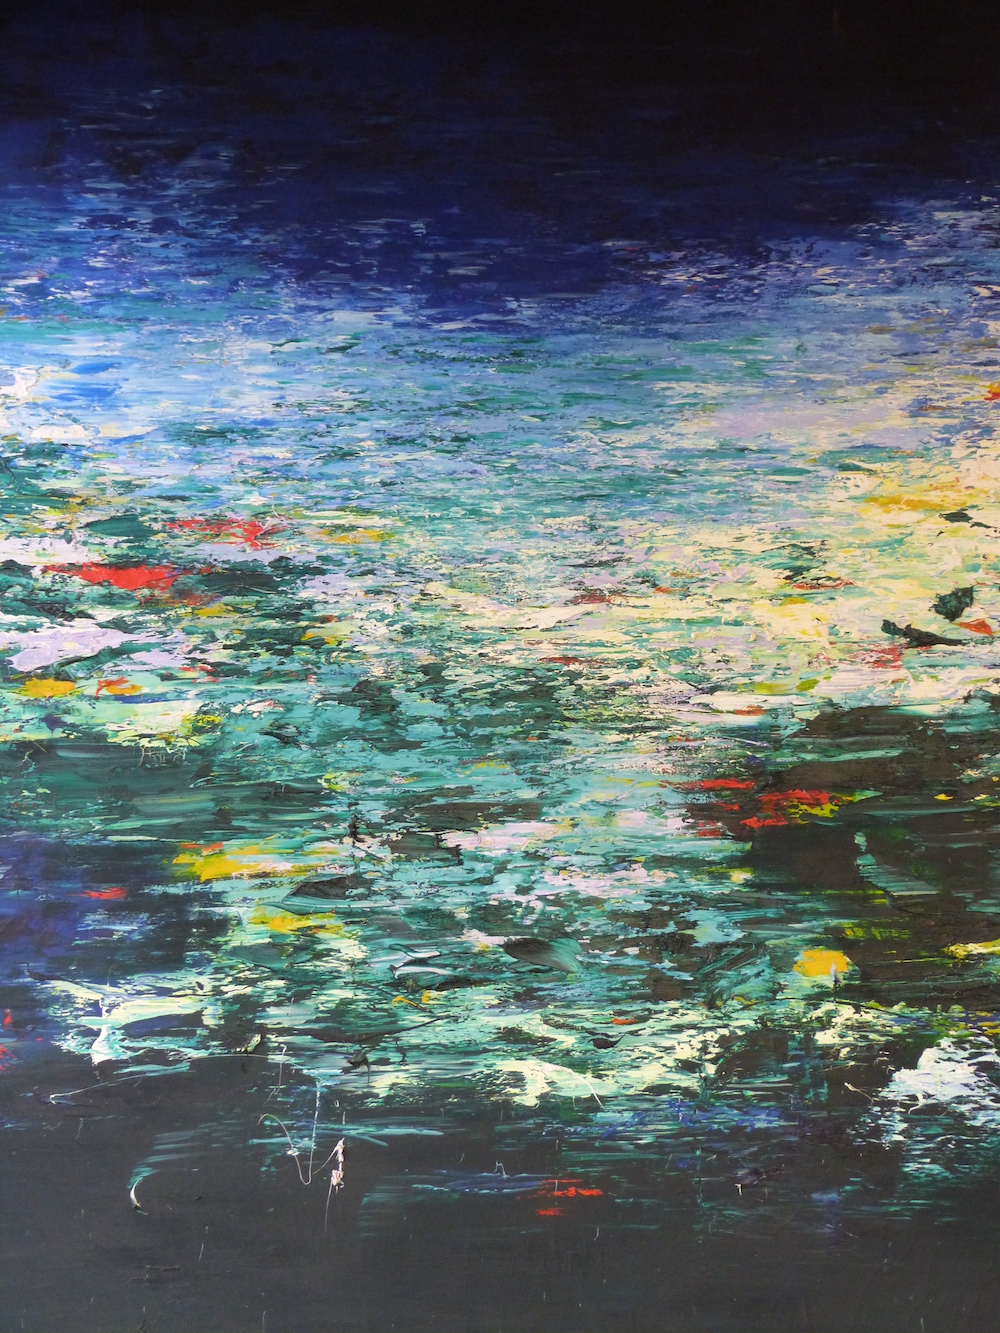 Martin Brewster Large Oil On Canvas Abstract Landscape Inscribed Verso 'Martin Brewster Lakeside 1990' Sold For Ś1100